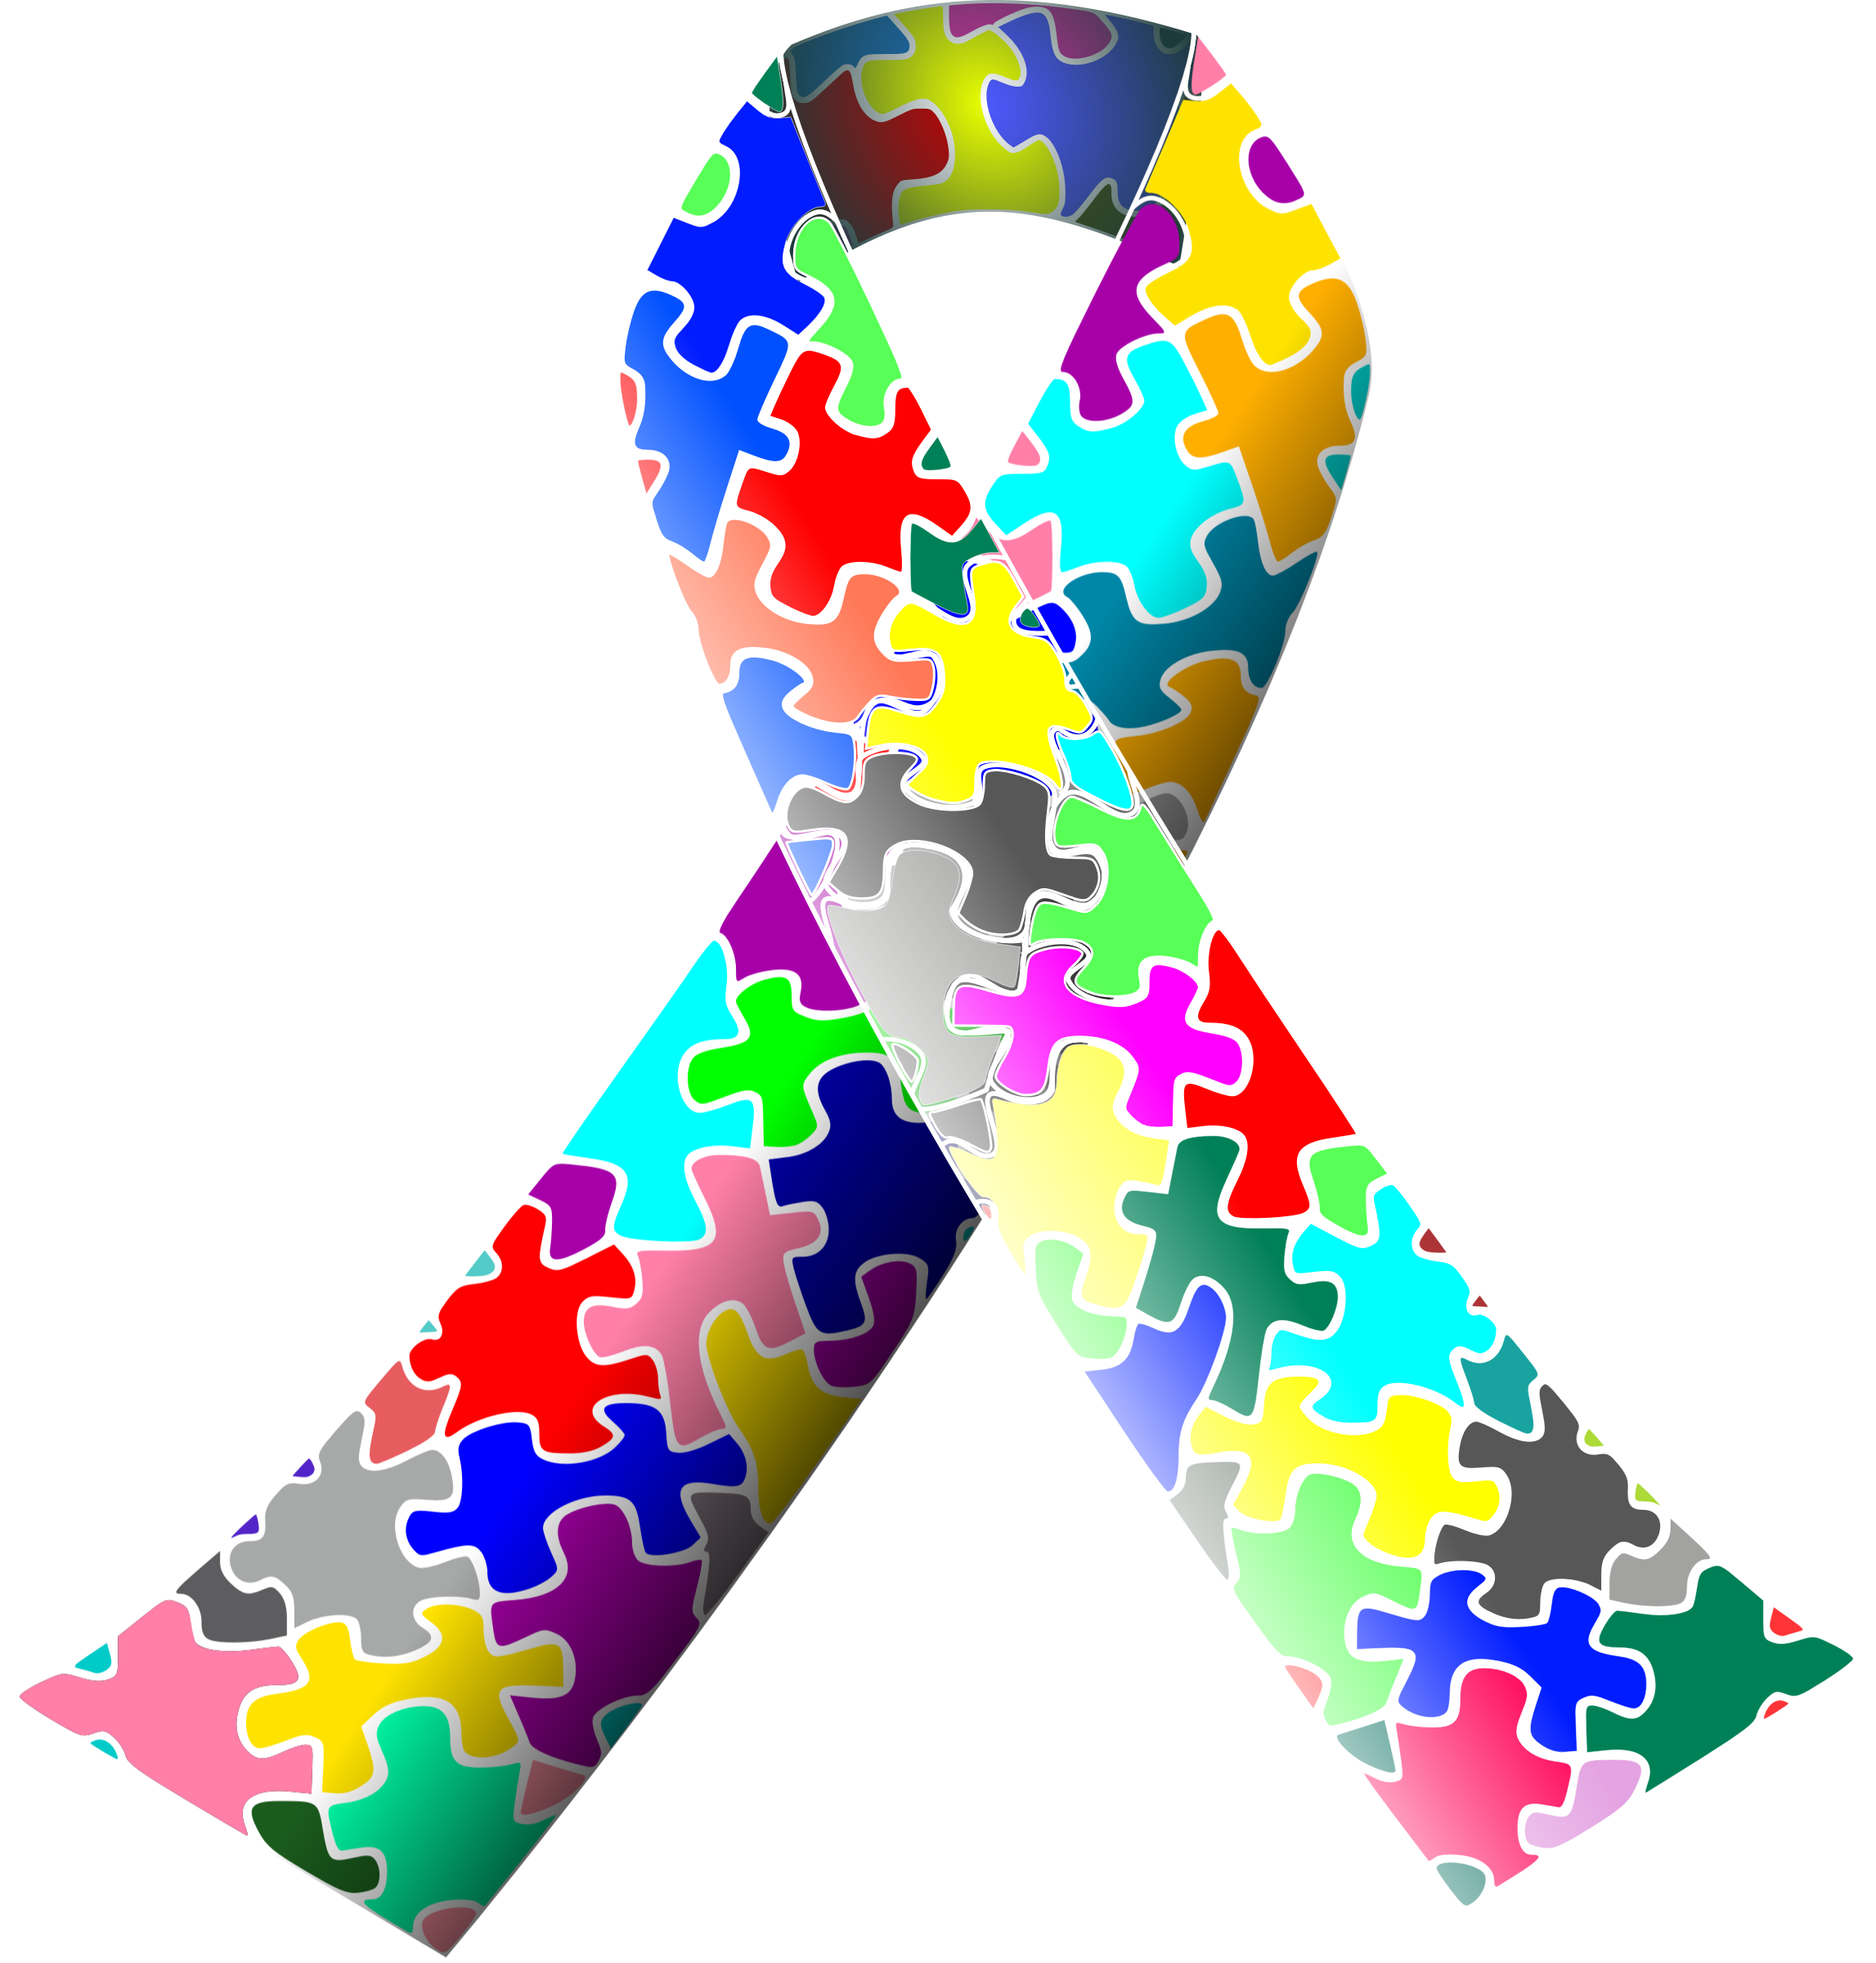 Autism Awareness Ribbon Clip Art Black And White - ClipArt Best